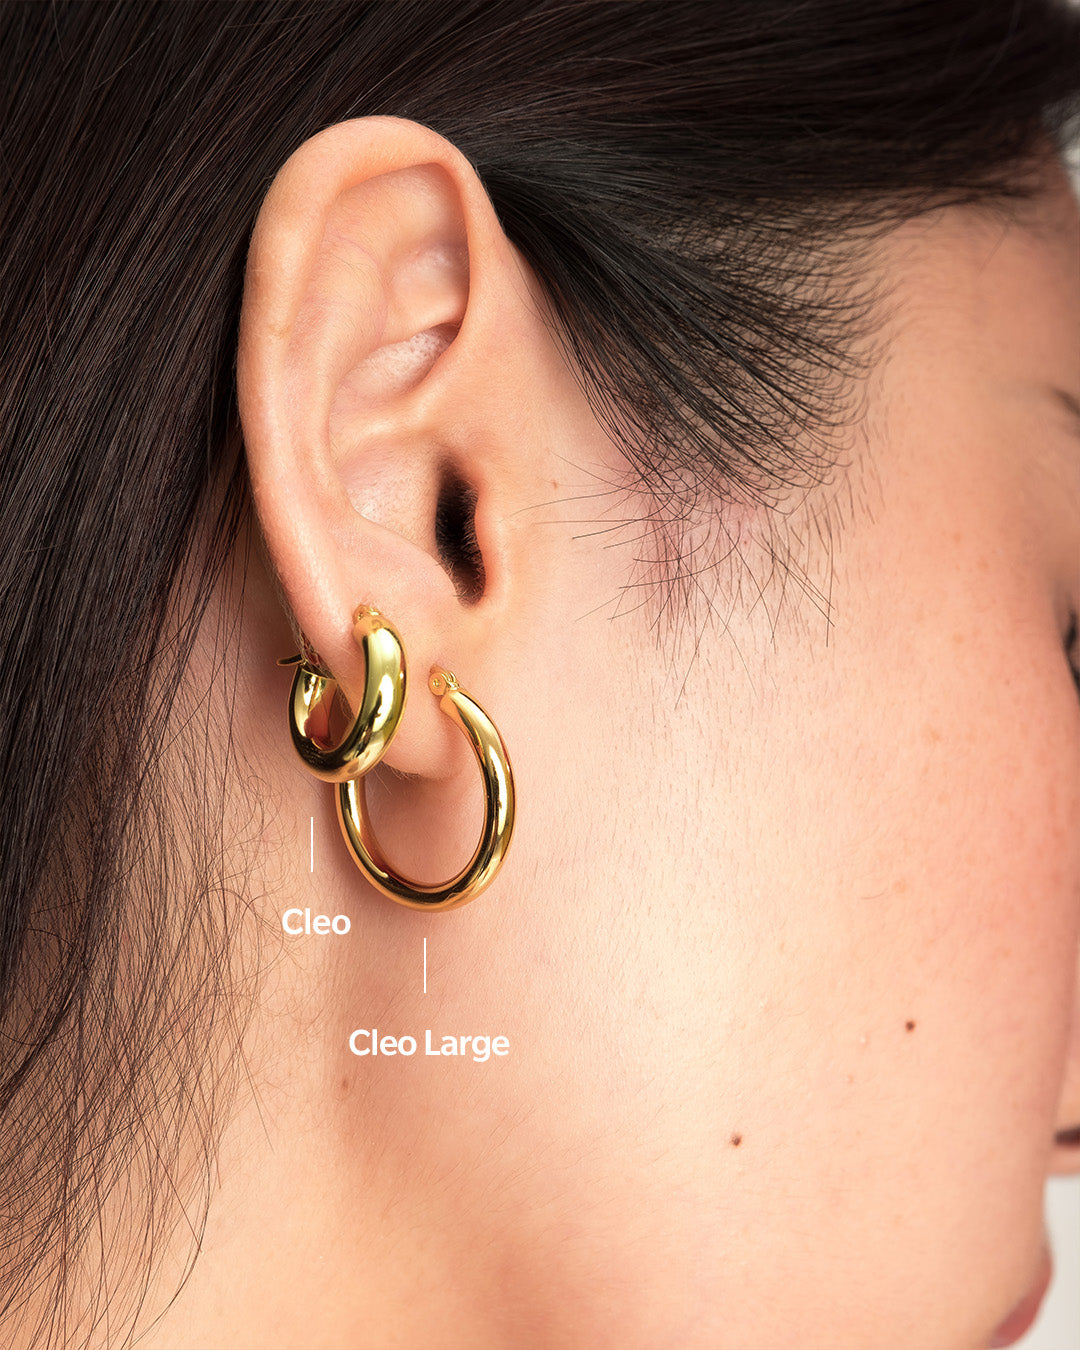 Cleo Large Gold Hoops